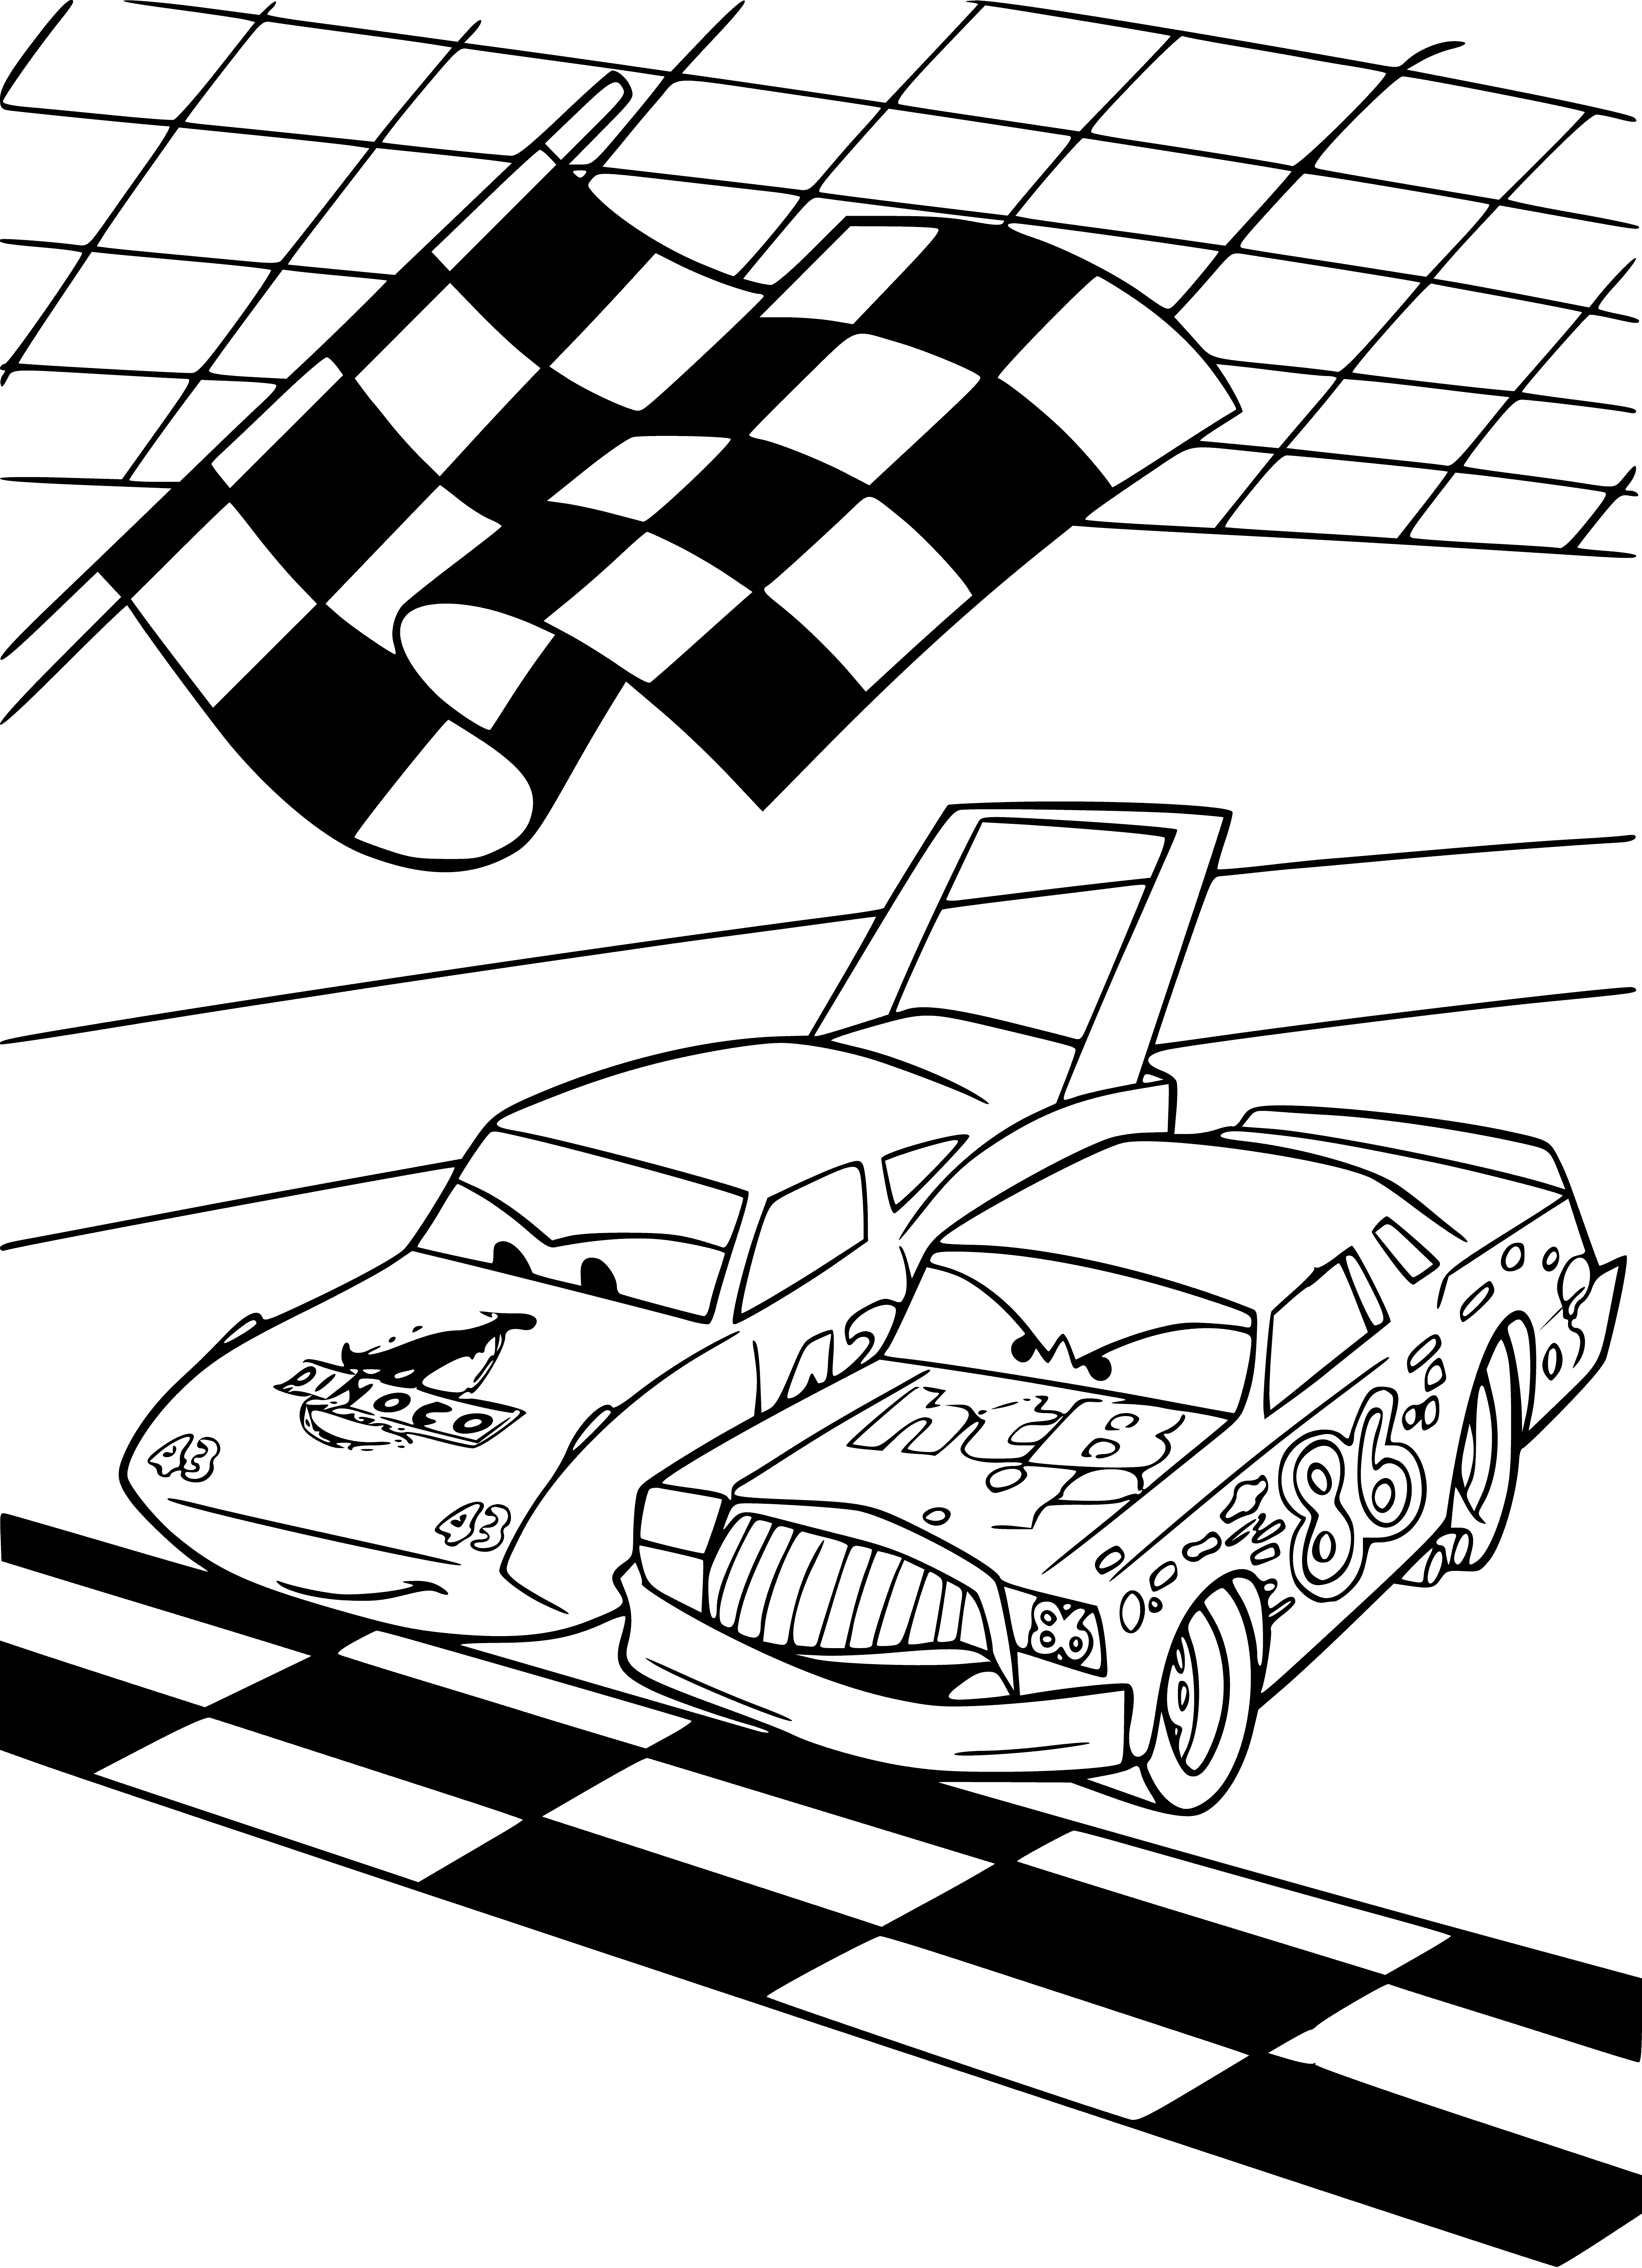 coloring page: A colorful car driving down a road with trees and sun shining on a blue sky.